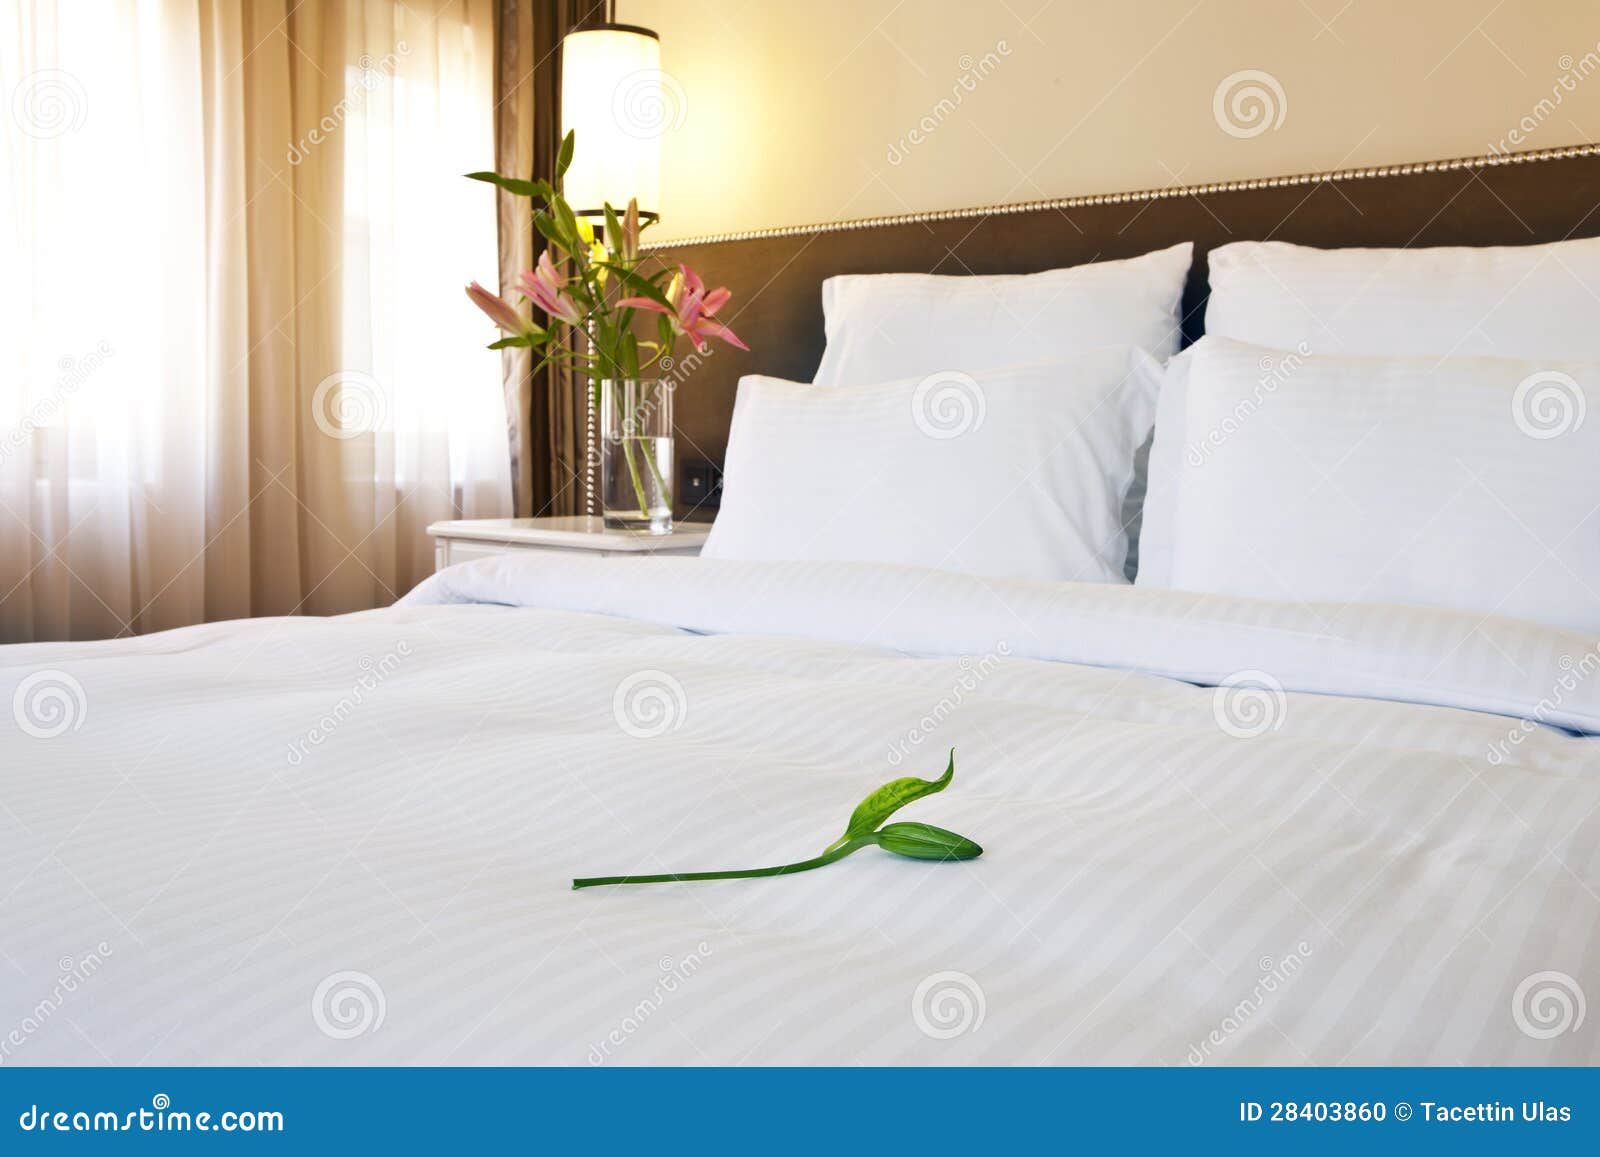 hotel bed